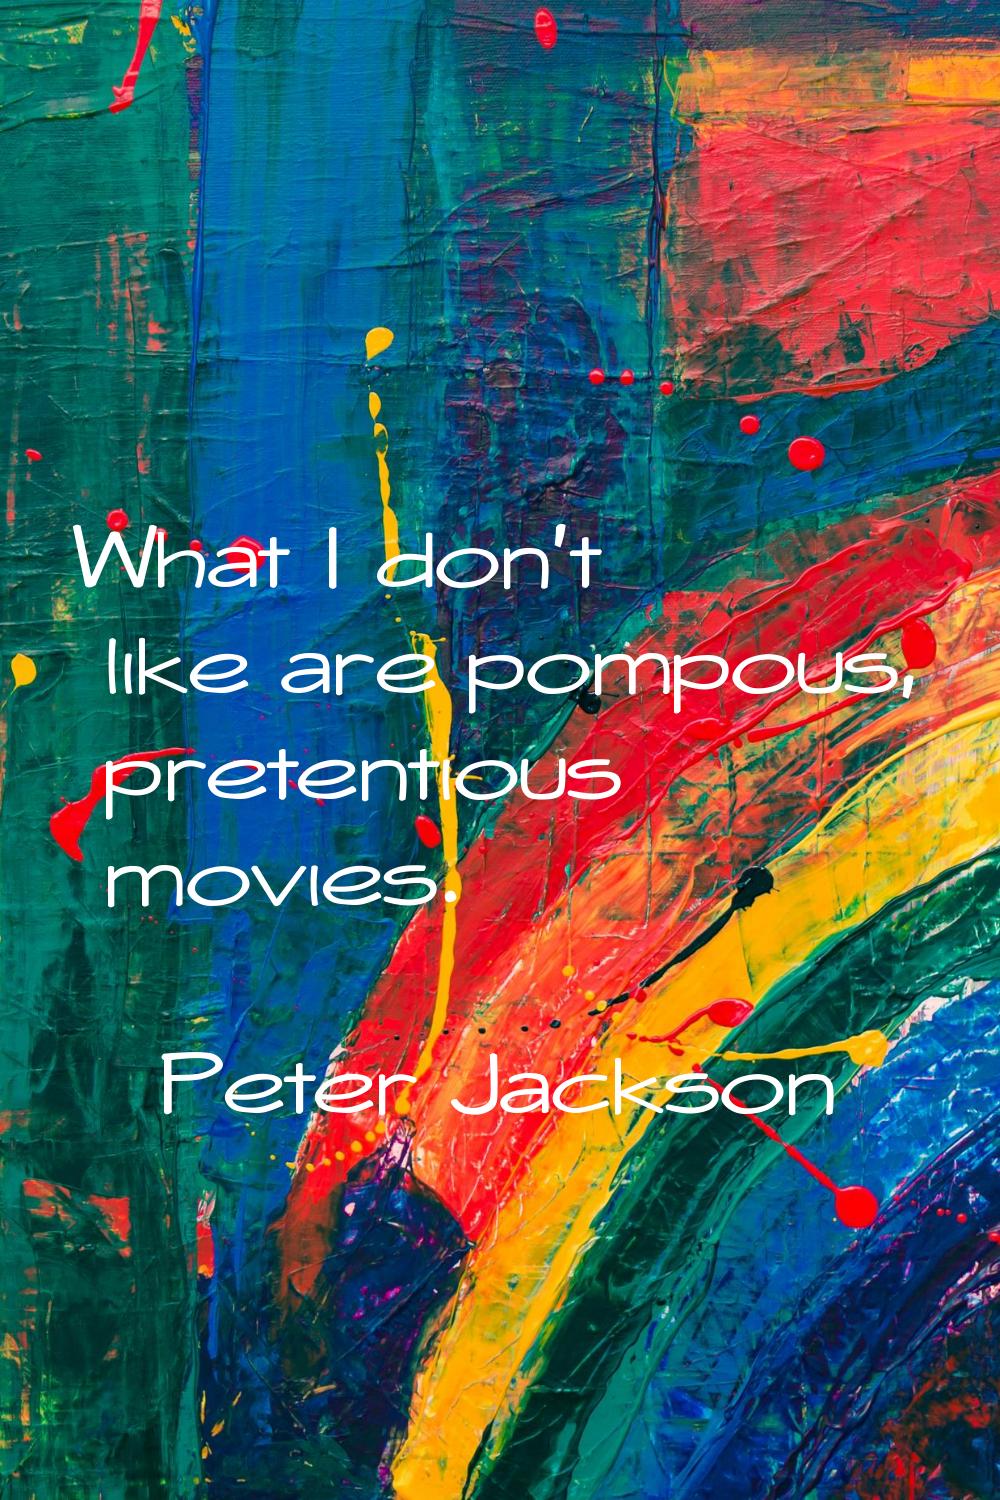 What I don't like are pompous, pretentious movies.